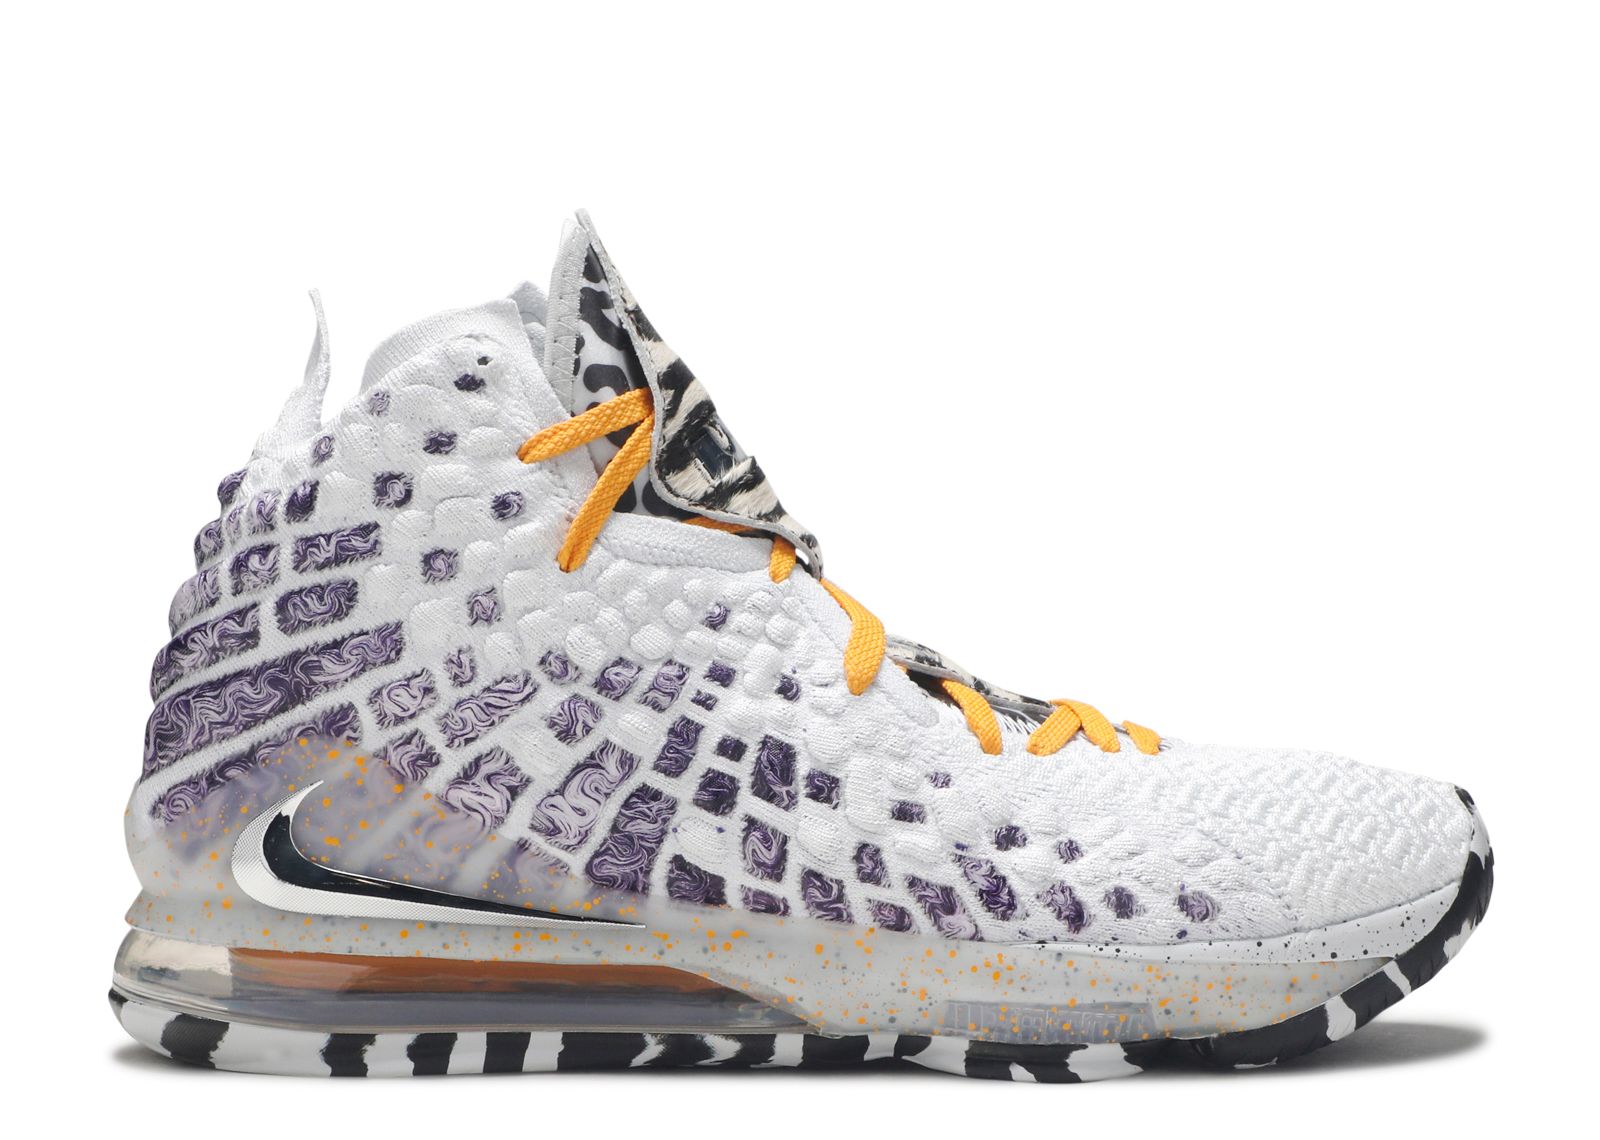 Nike LeBron 17 'Lakers' Colorway Release Date Details, Official Images